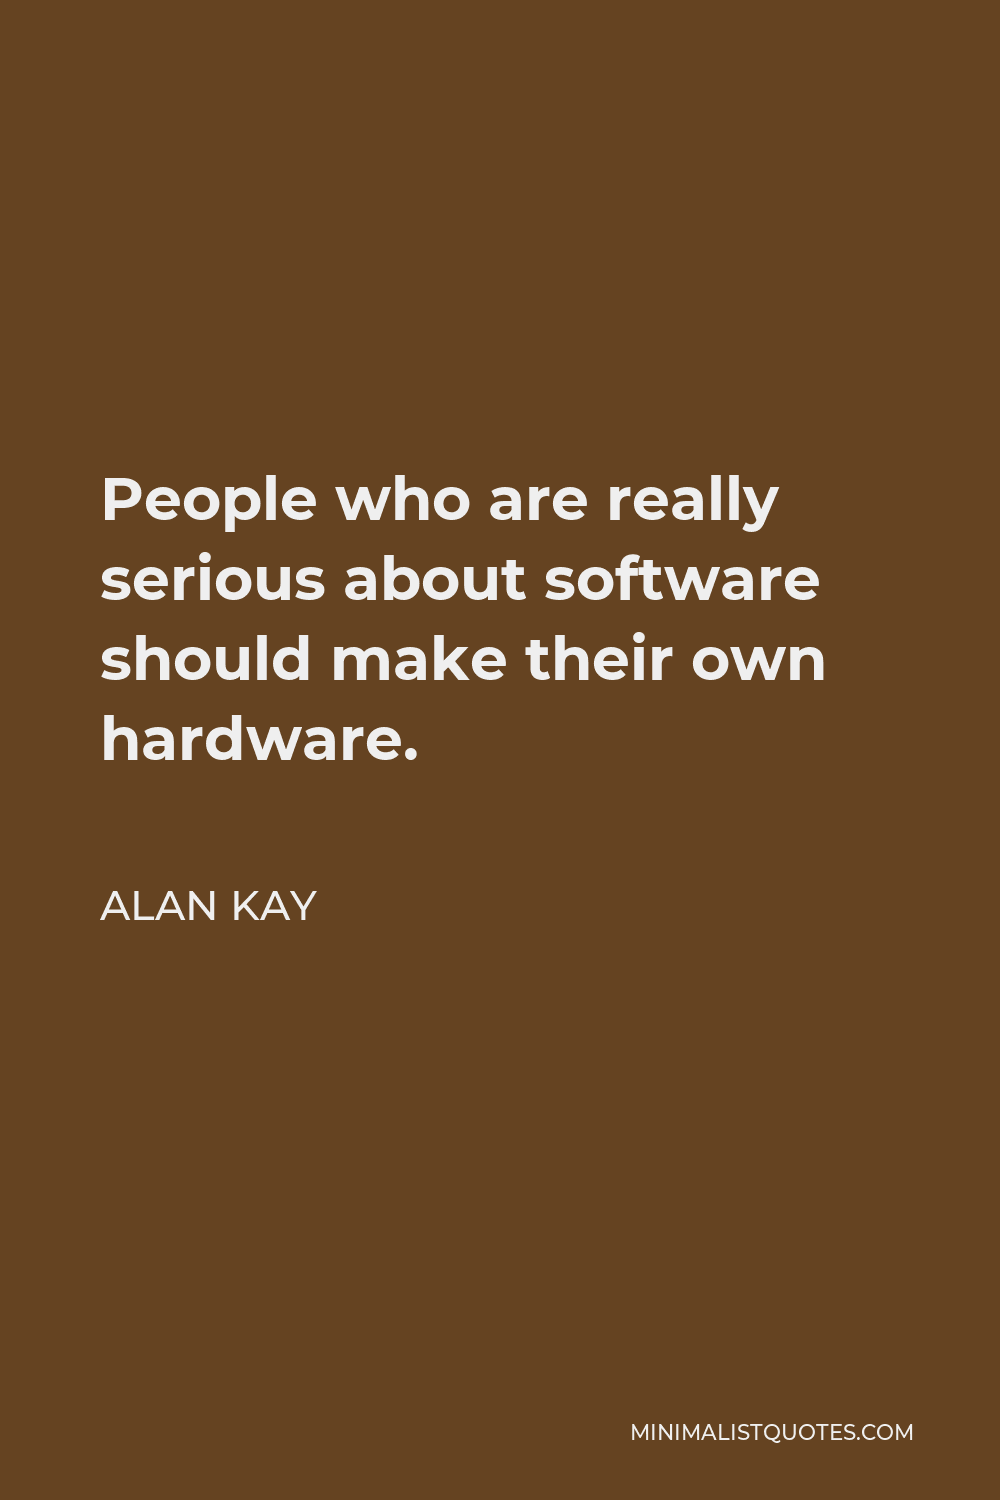 Alan Kay Quote - People who are really serious about software should make their own hardware.